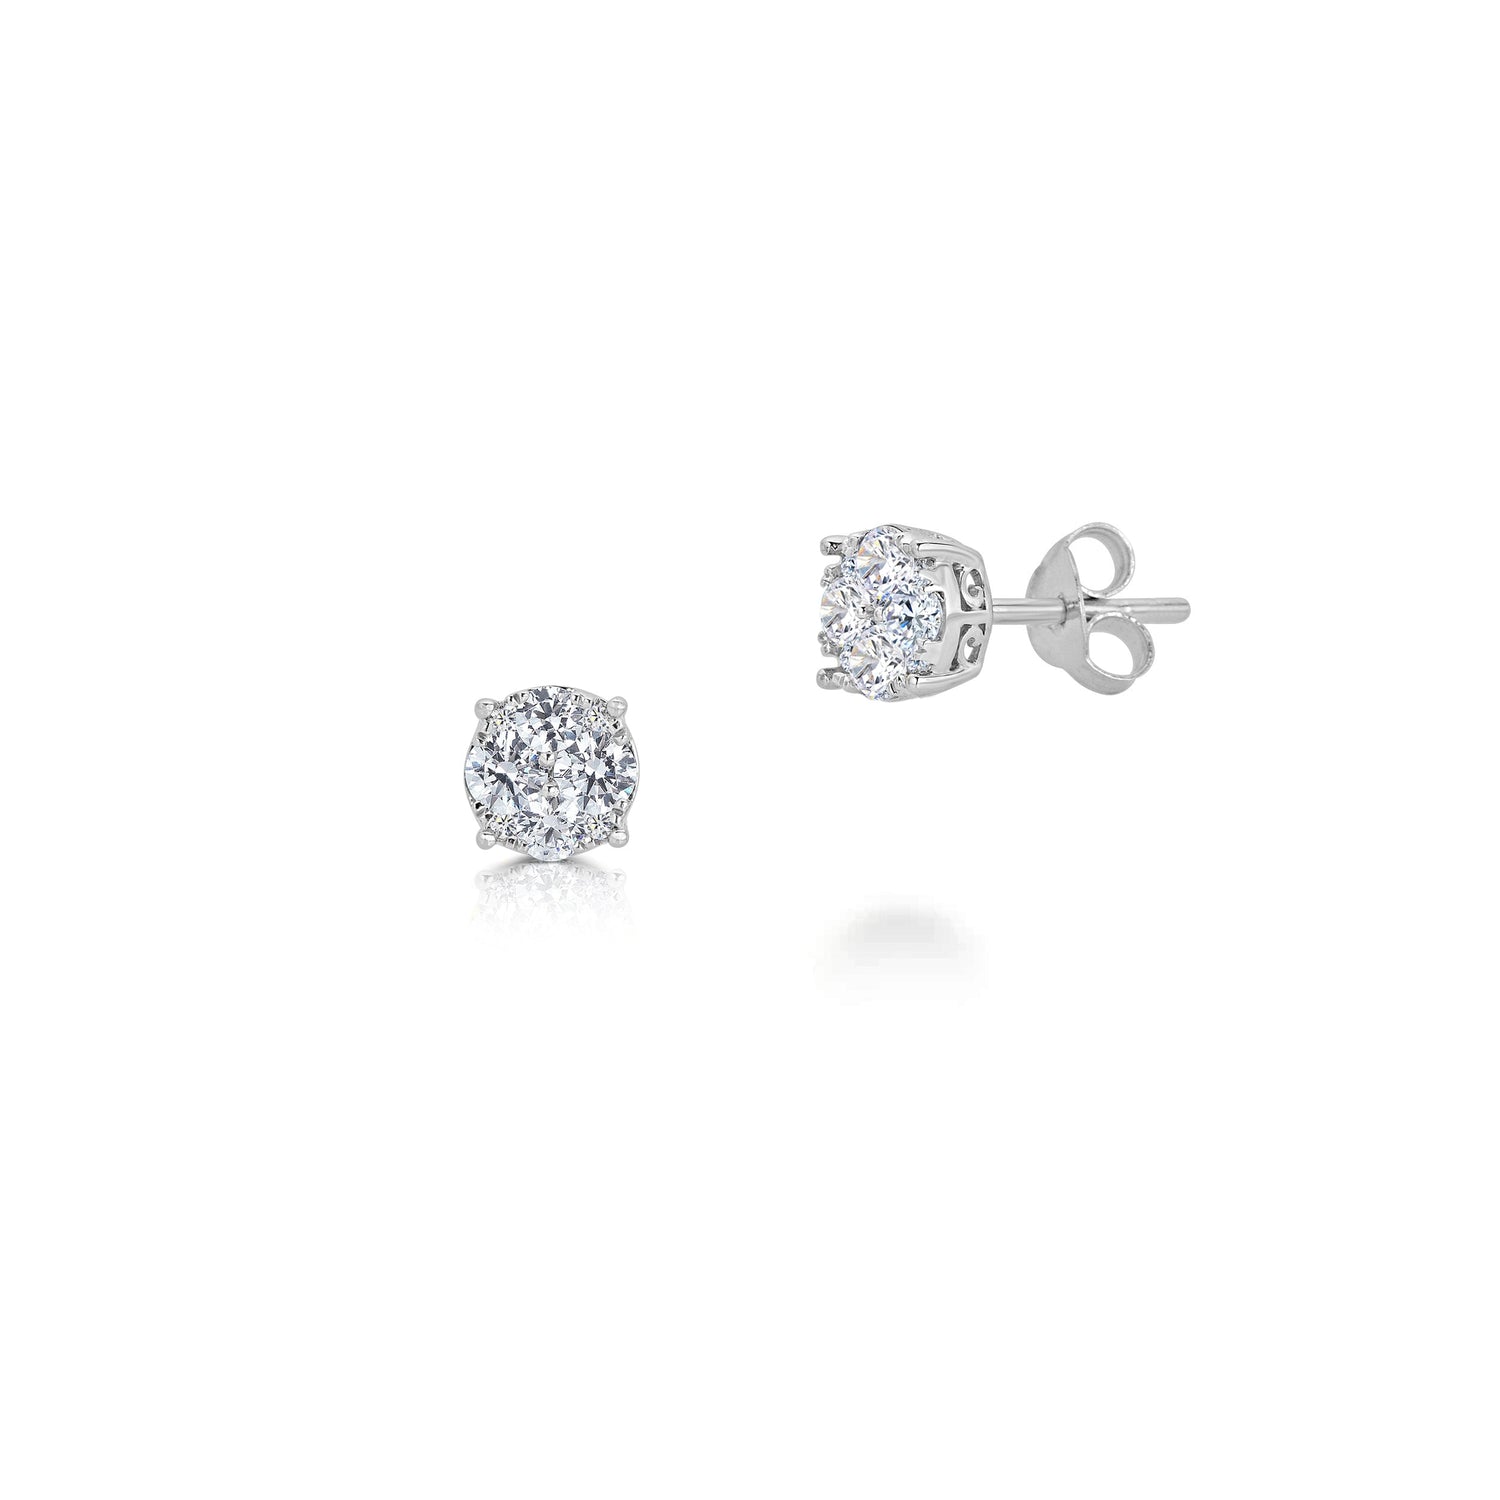 1/4 - 1 Cttw I2 Clarity Diamond Round Grand Cluster Stud Earrings in 14K Gold